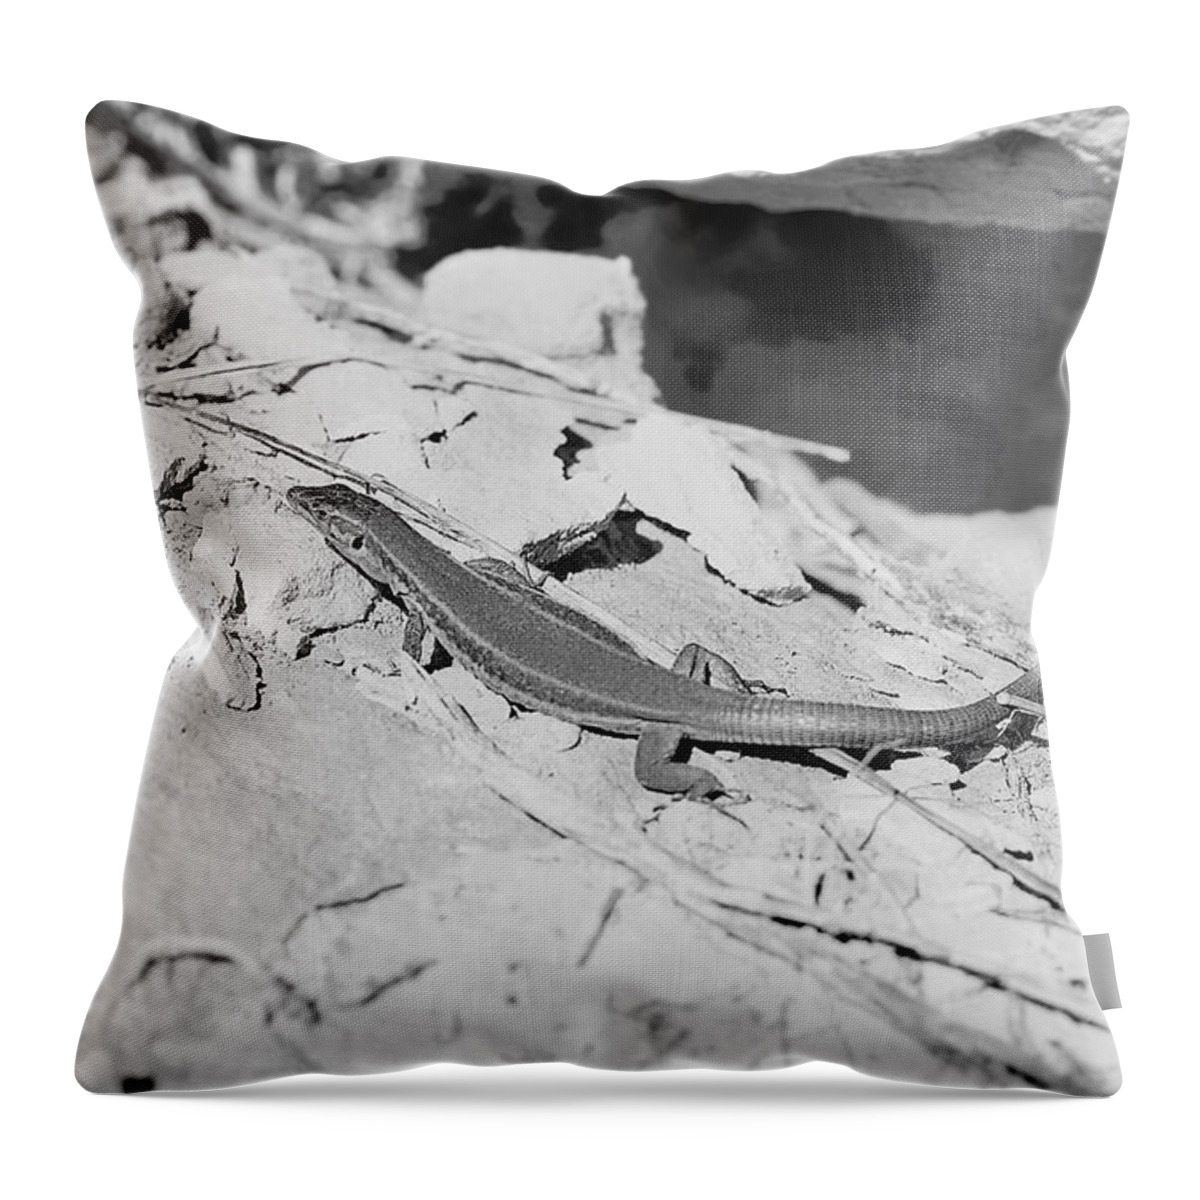 Maltese Wall Lizard Throw Pillow featuring the photograph Wall Lizard - Black And White by Jacob Von Sternberg